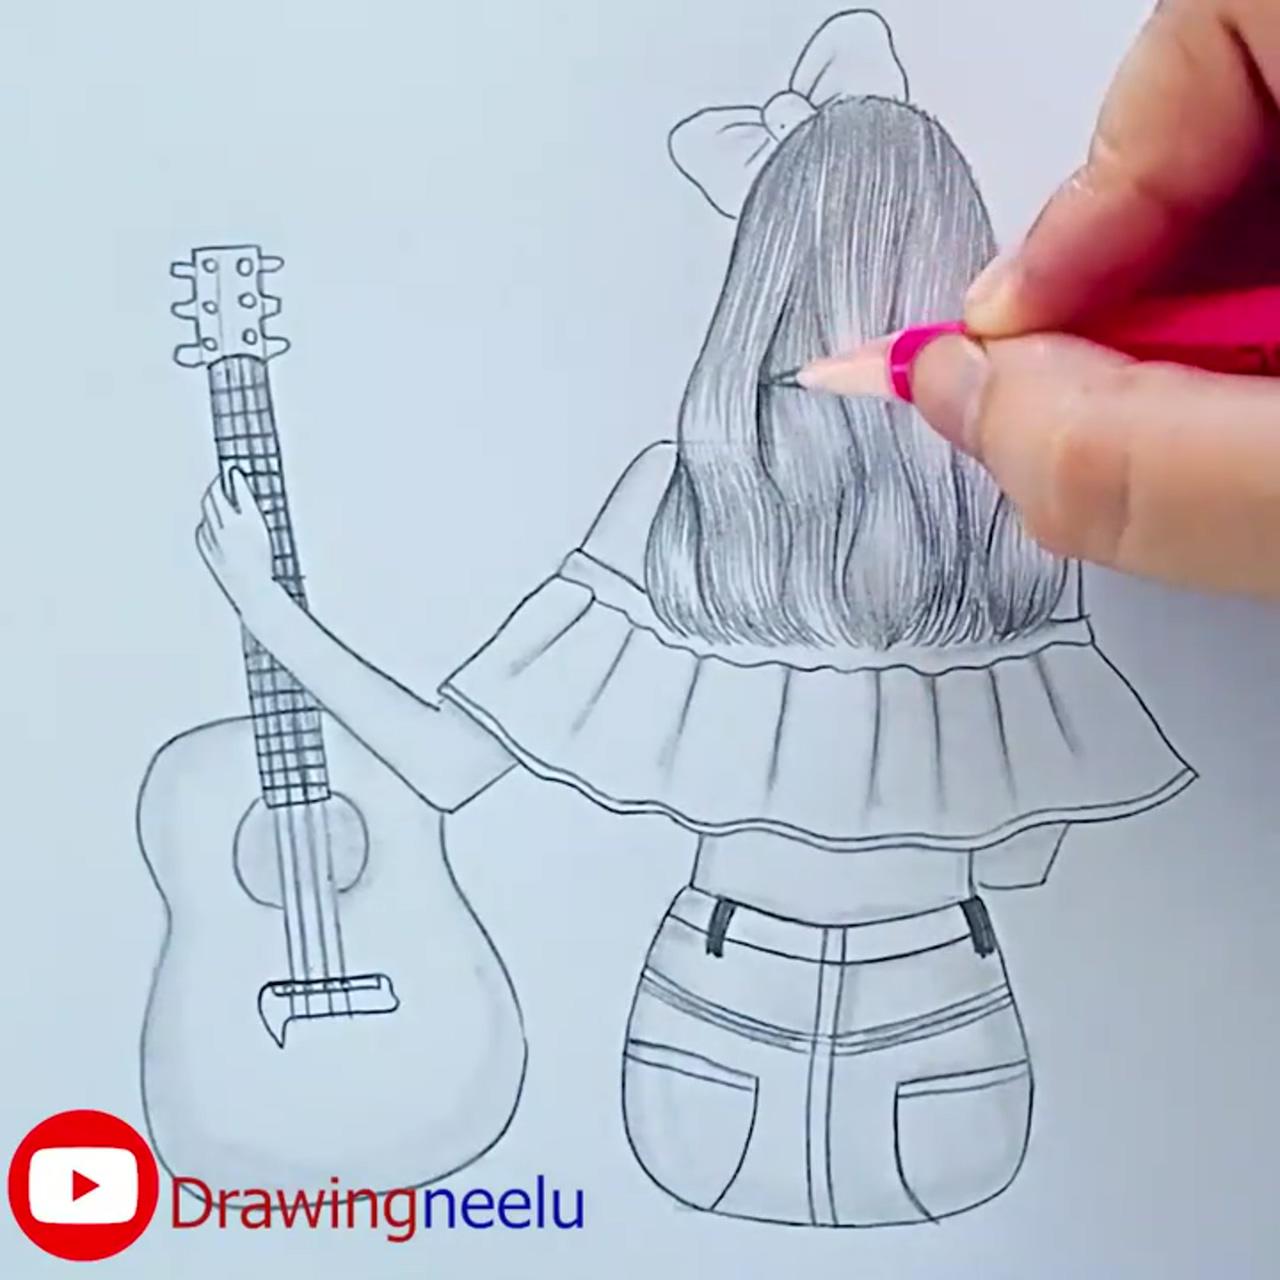 How to draw a girl with guitar- step by step beginner drawing, pencil drawing, easy simple drawing | pencil sketches of girls